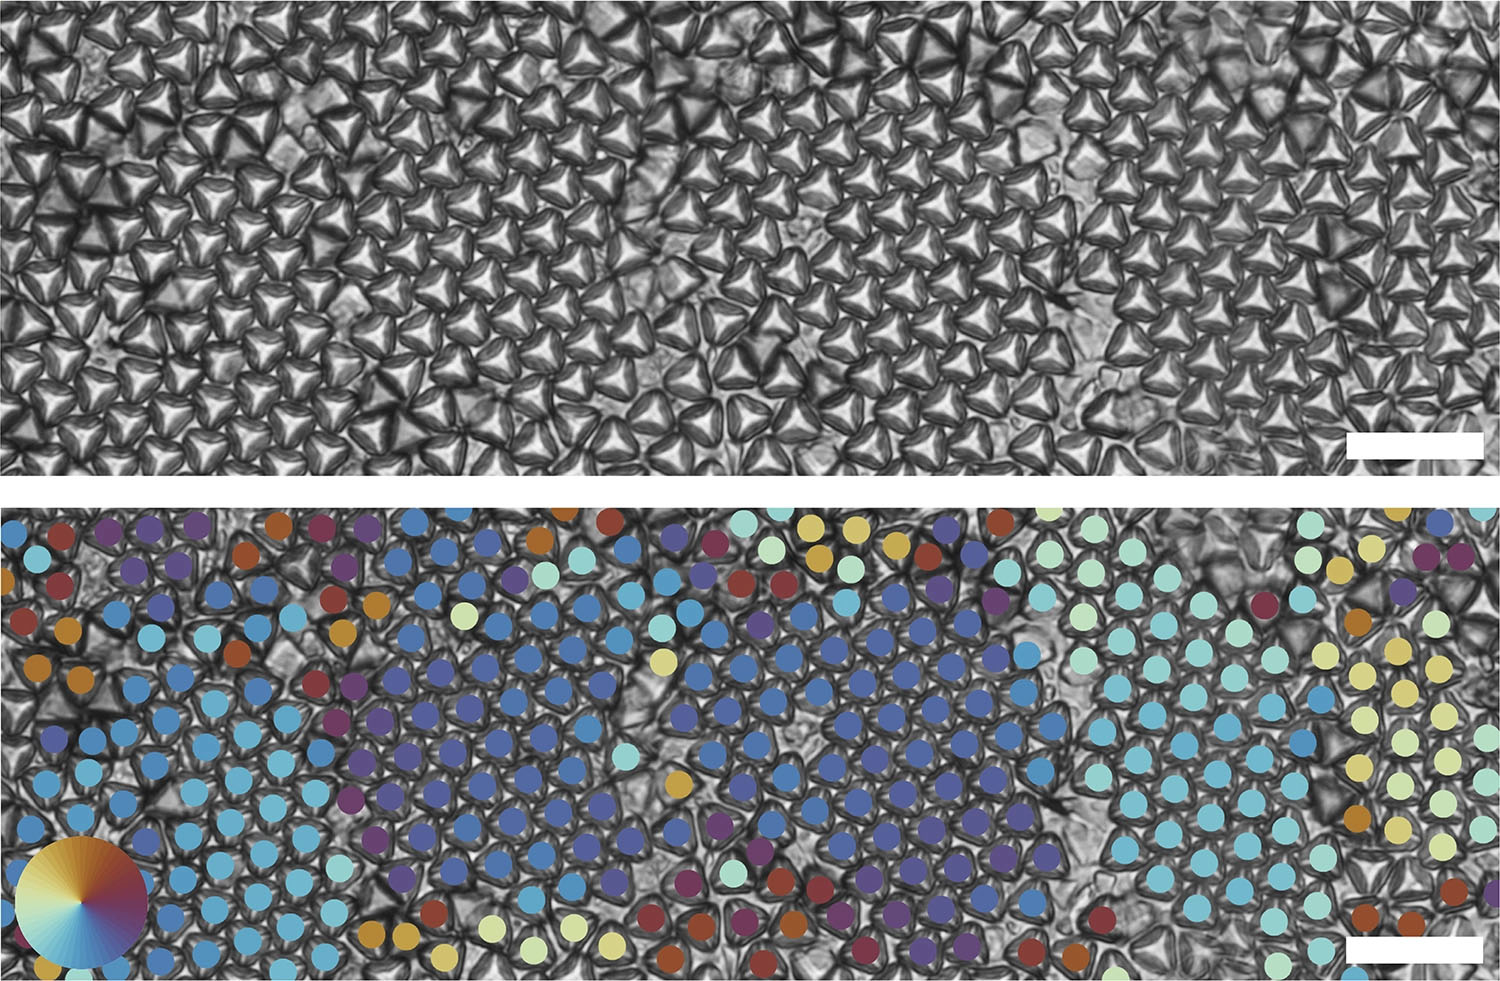 Optical images of truncated tetrahedrons forming multiple hexagonal grains